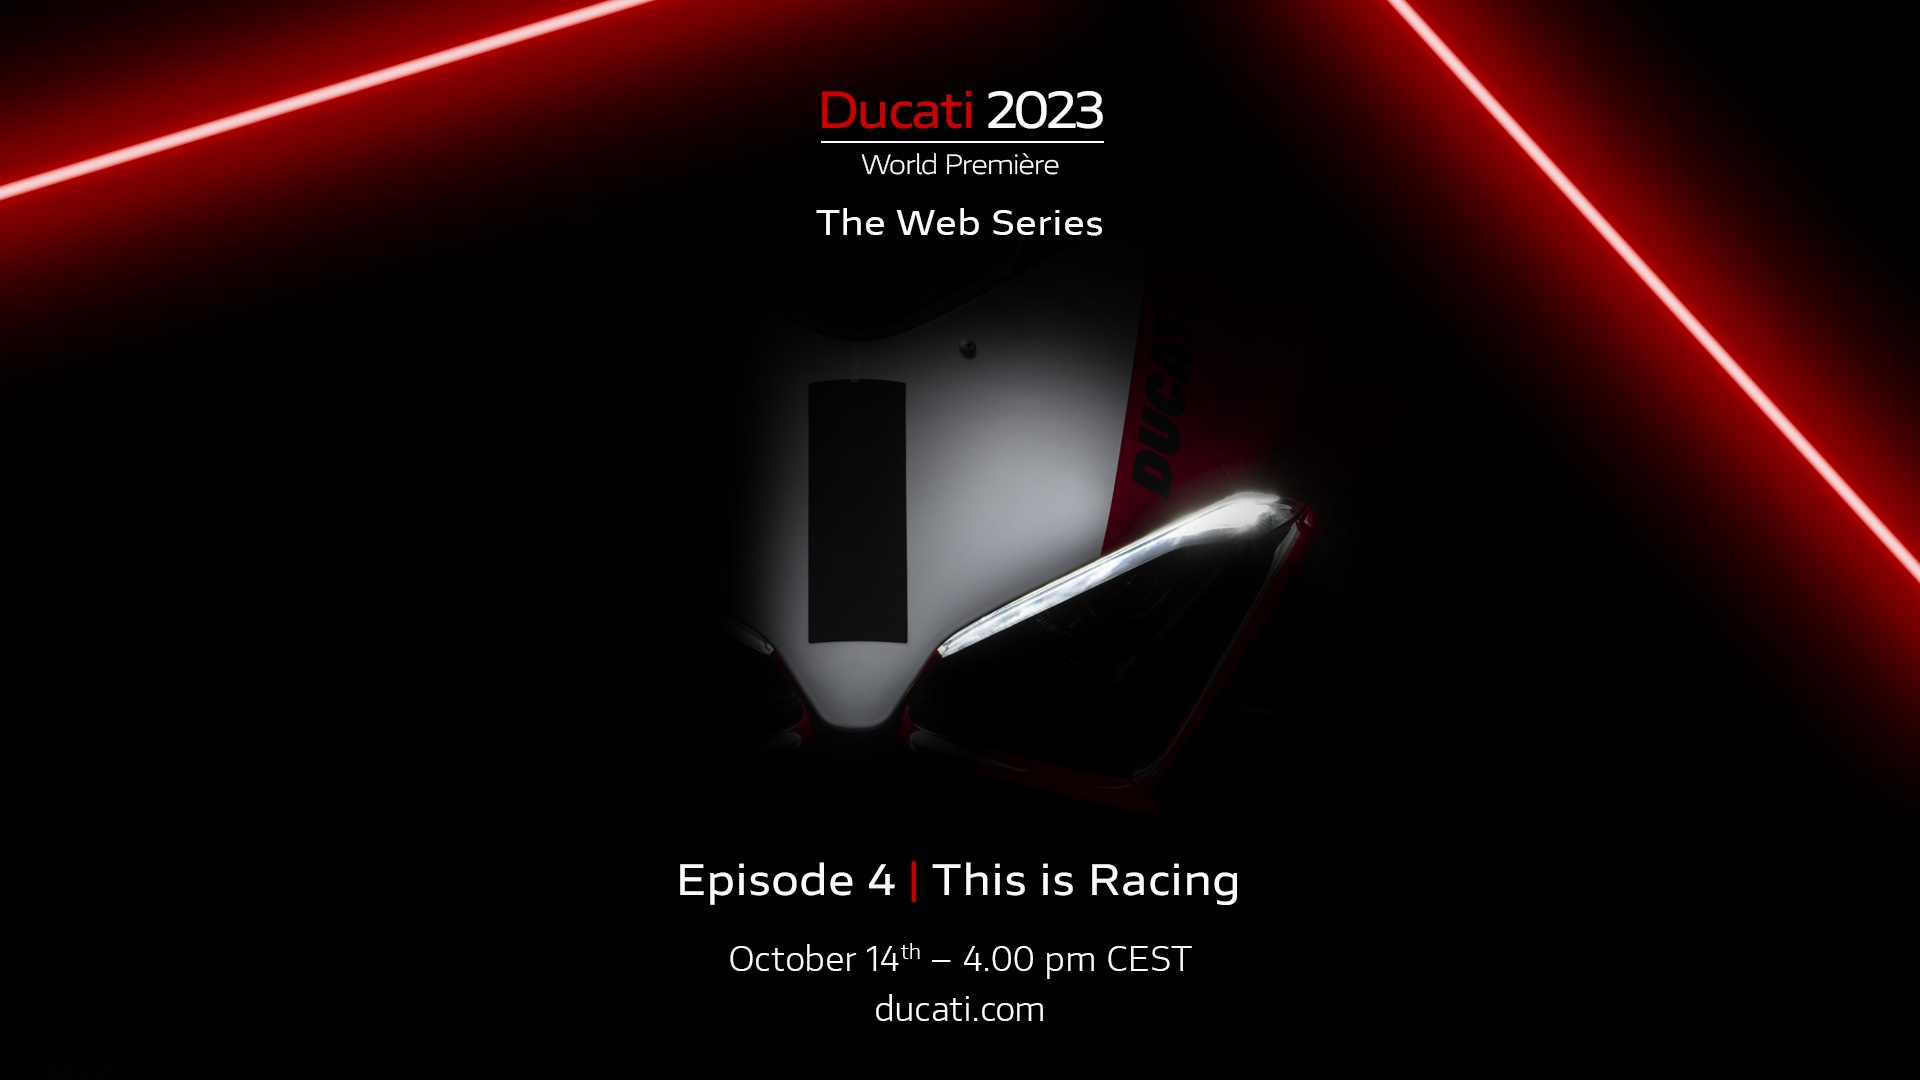 Episode 4: This is Racing – Ducati World Première 2023